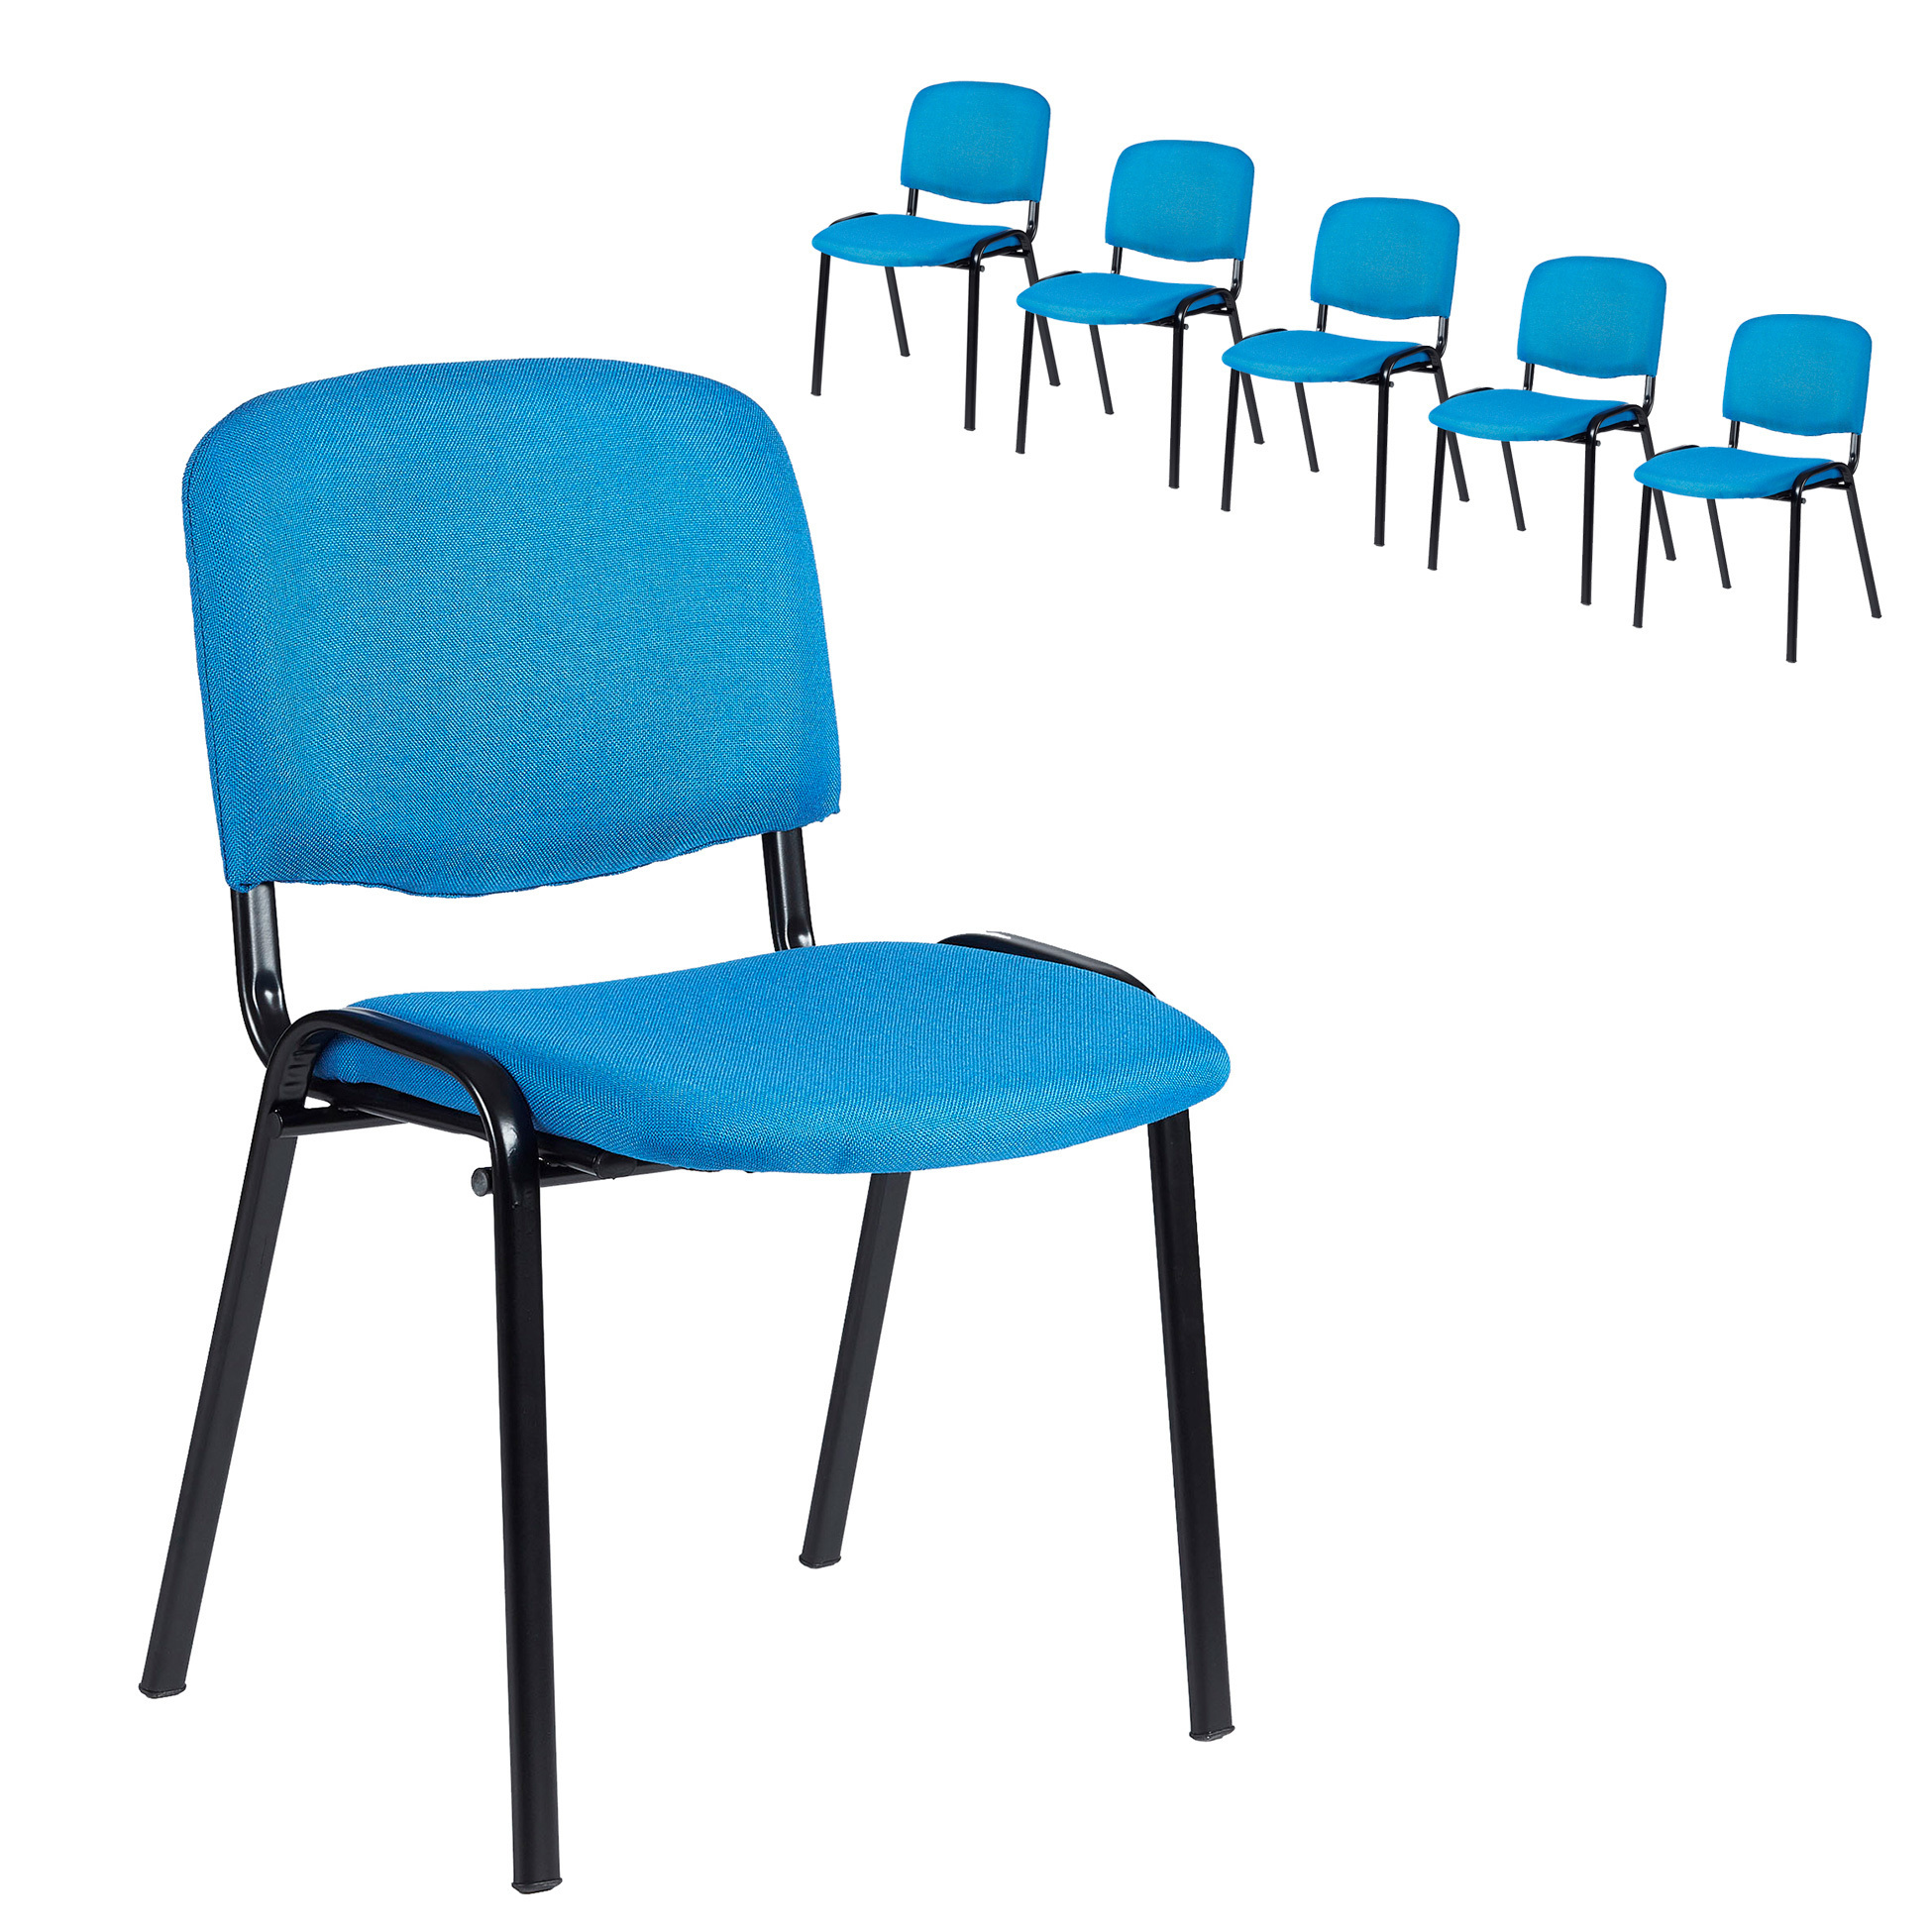 blue stackable office conference chairs set of 6